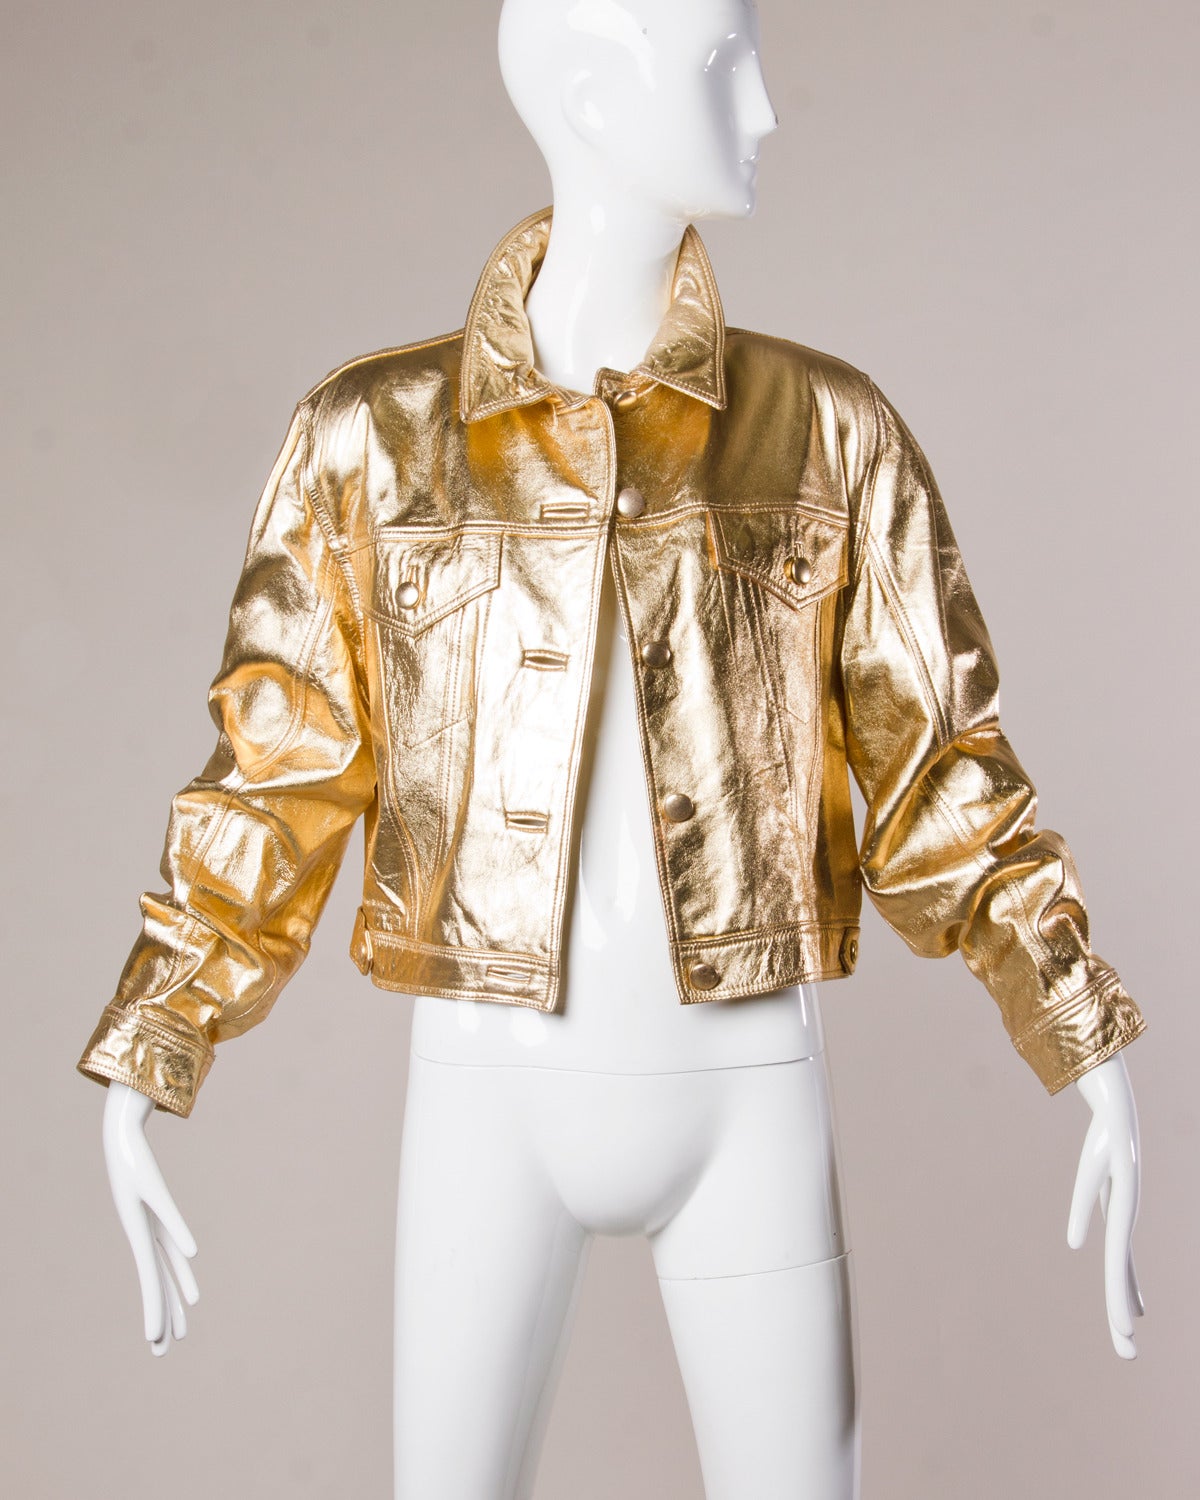 Incredible reflective metallic gold vintage leather jacket by Lillie Rubin. 

Details:

Fully Lined
Front Button Closure
Shoulder Pads Sewn into the Lining
Marked Size: Large
Estimated Size: Medium-Large
Label: Lillie